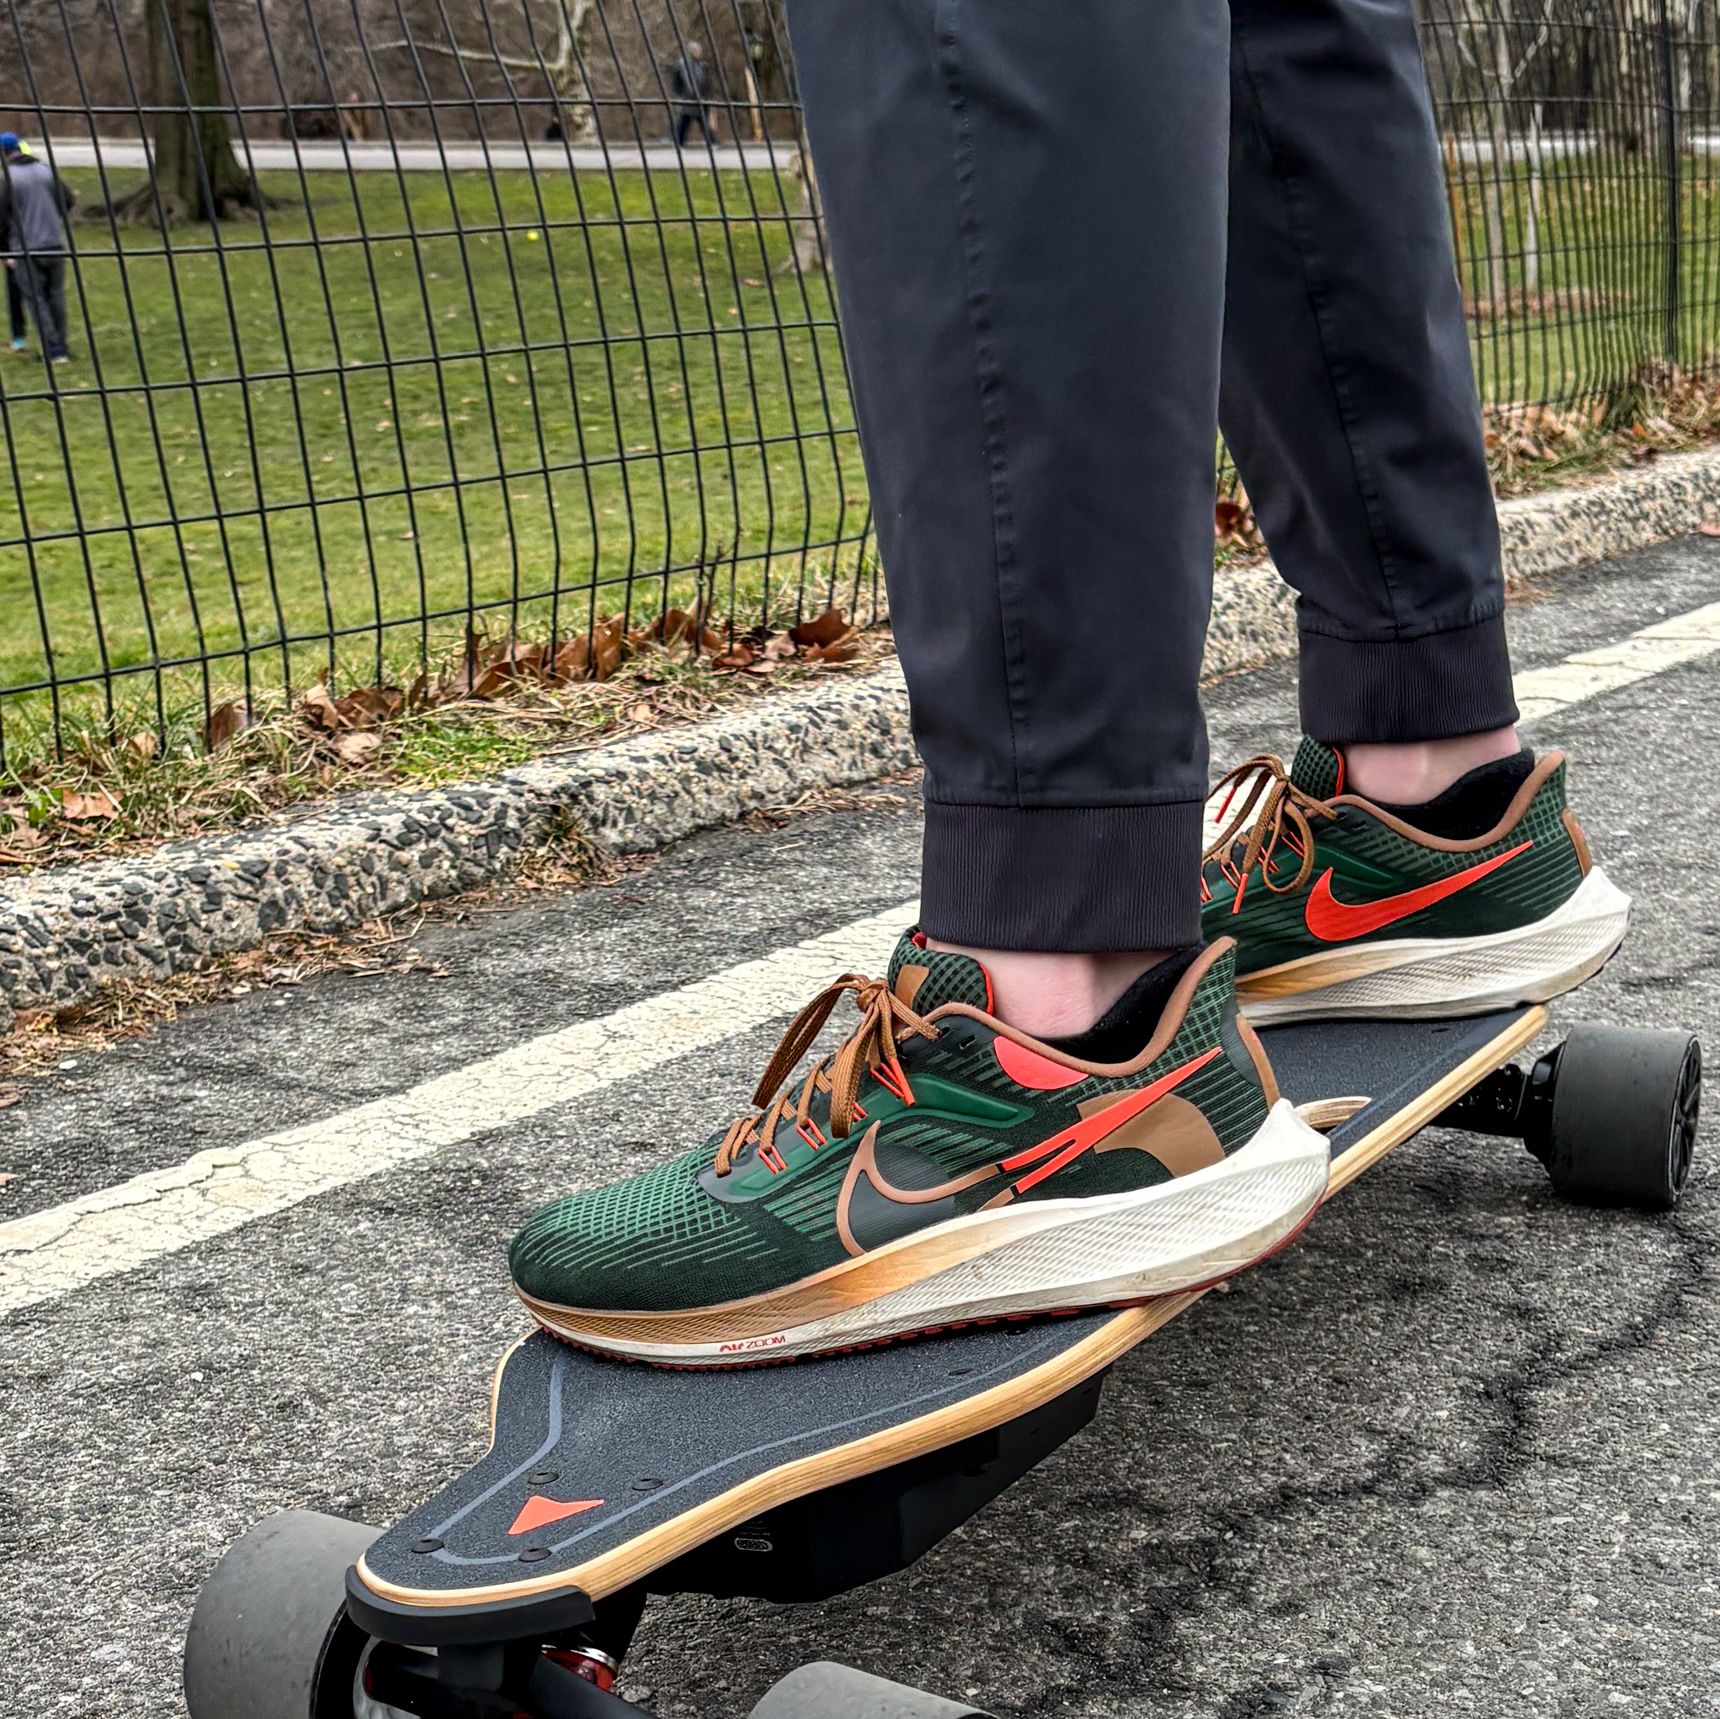 Let These Speedy Electric Skateboards Replace Your Kicking Power for Good